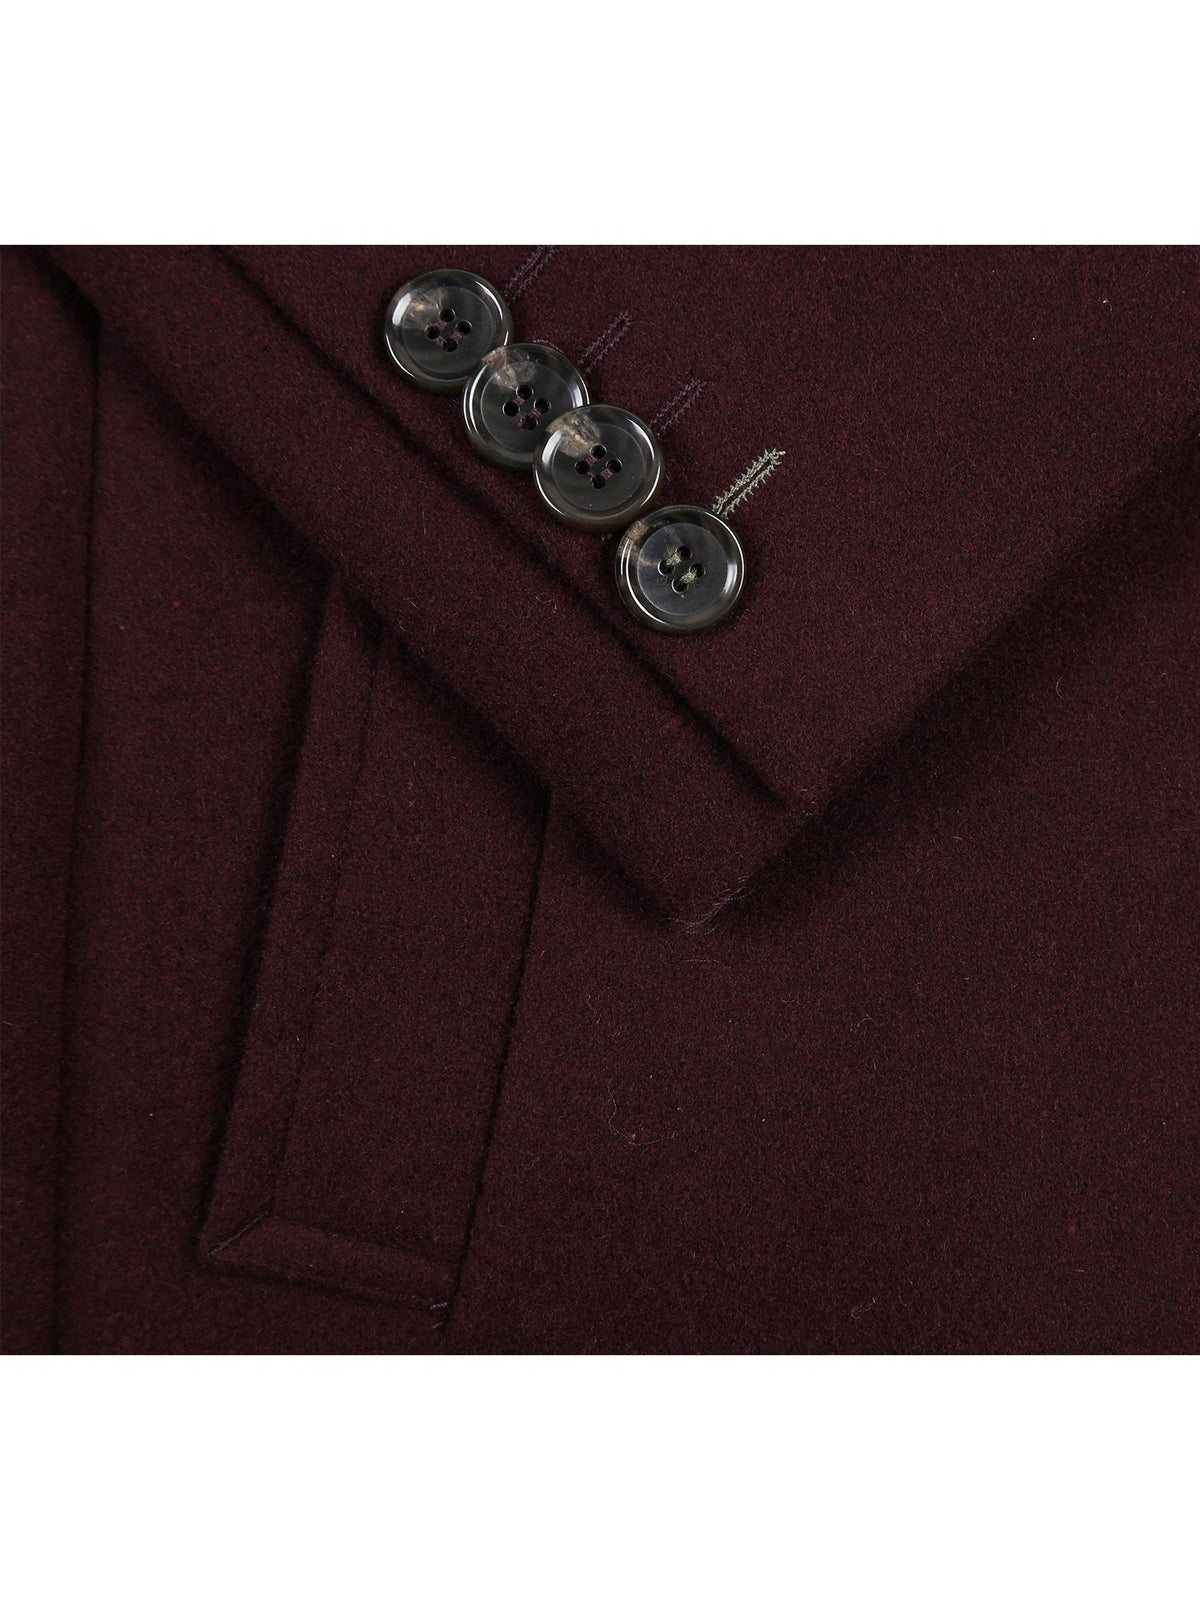 English Laundry Wool Blend Breasted Burgundy Top Coat